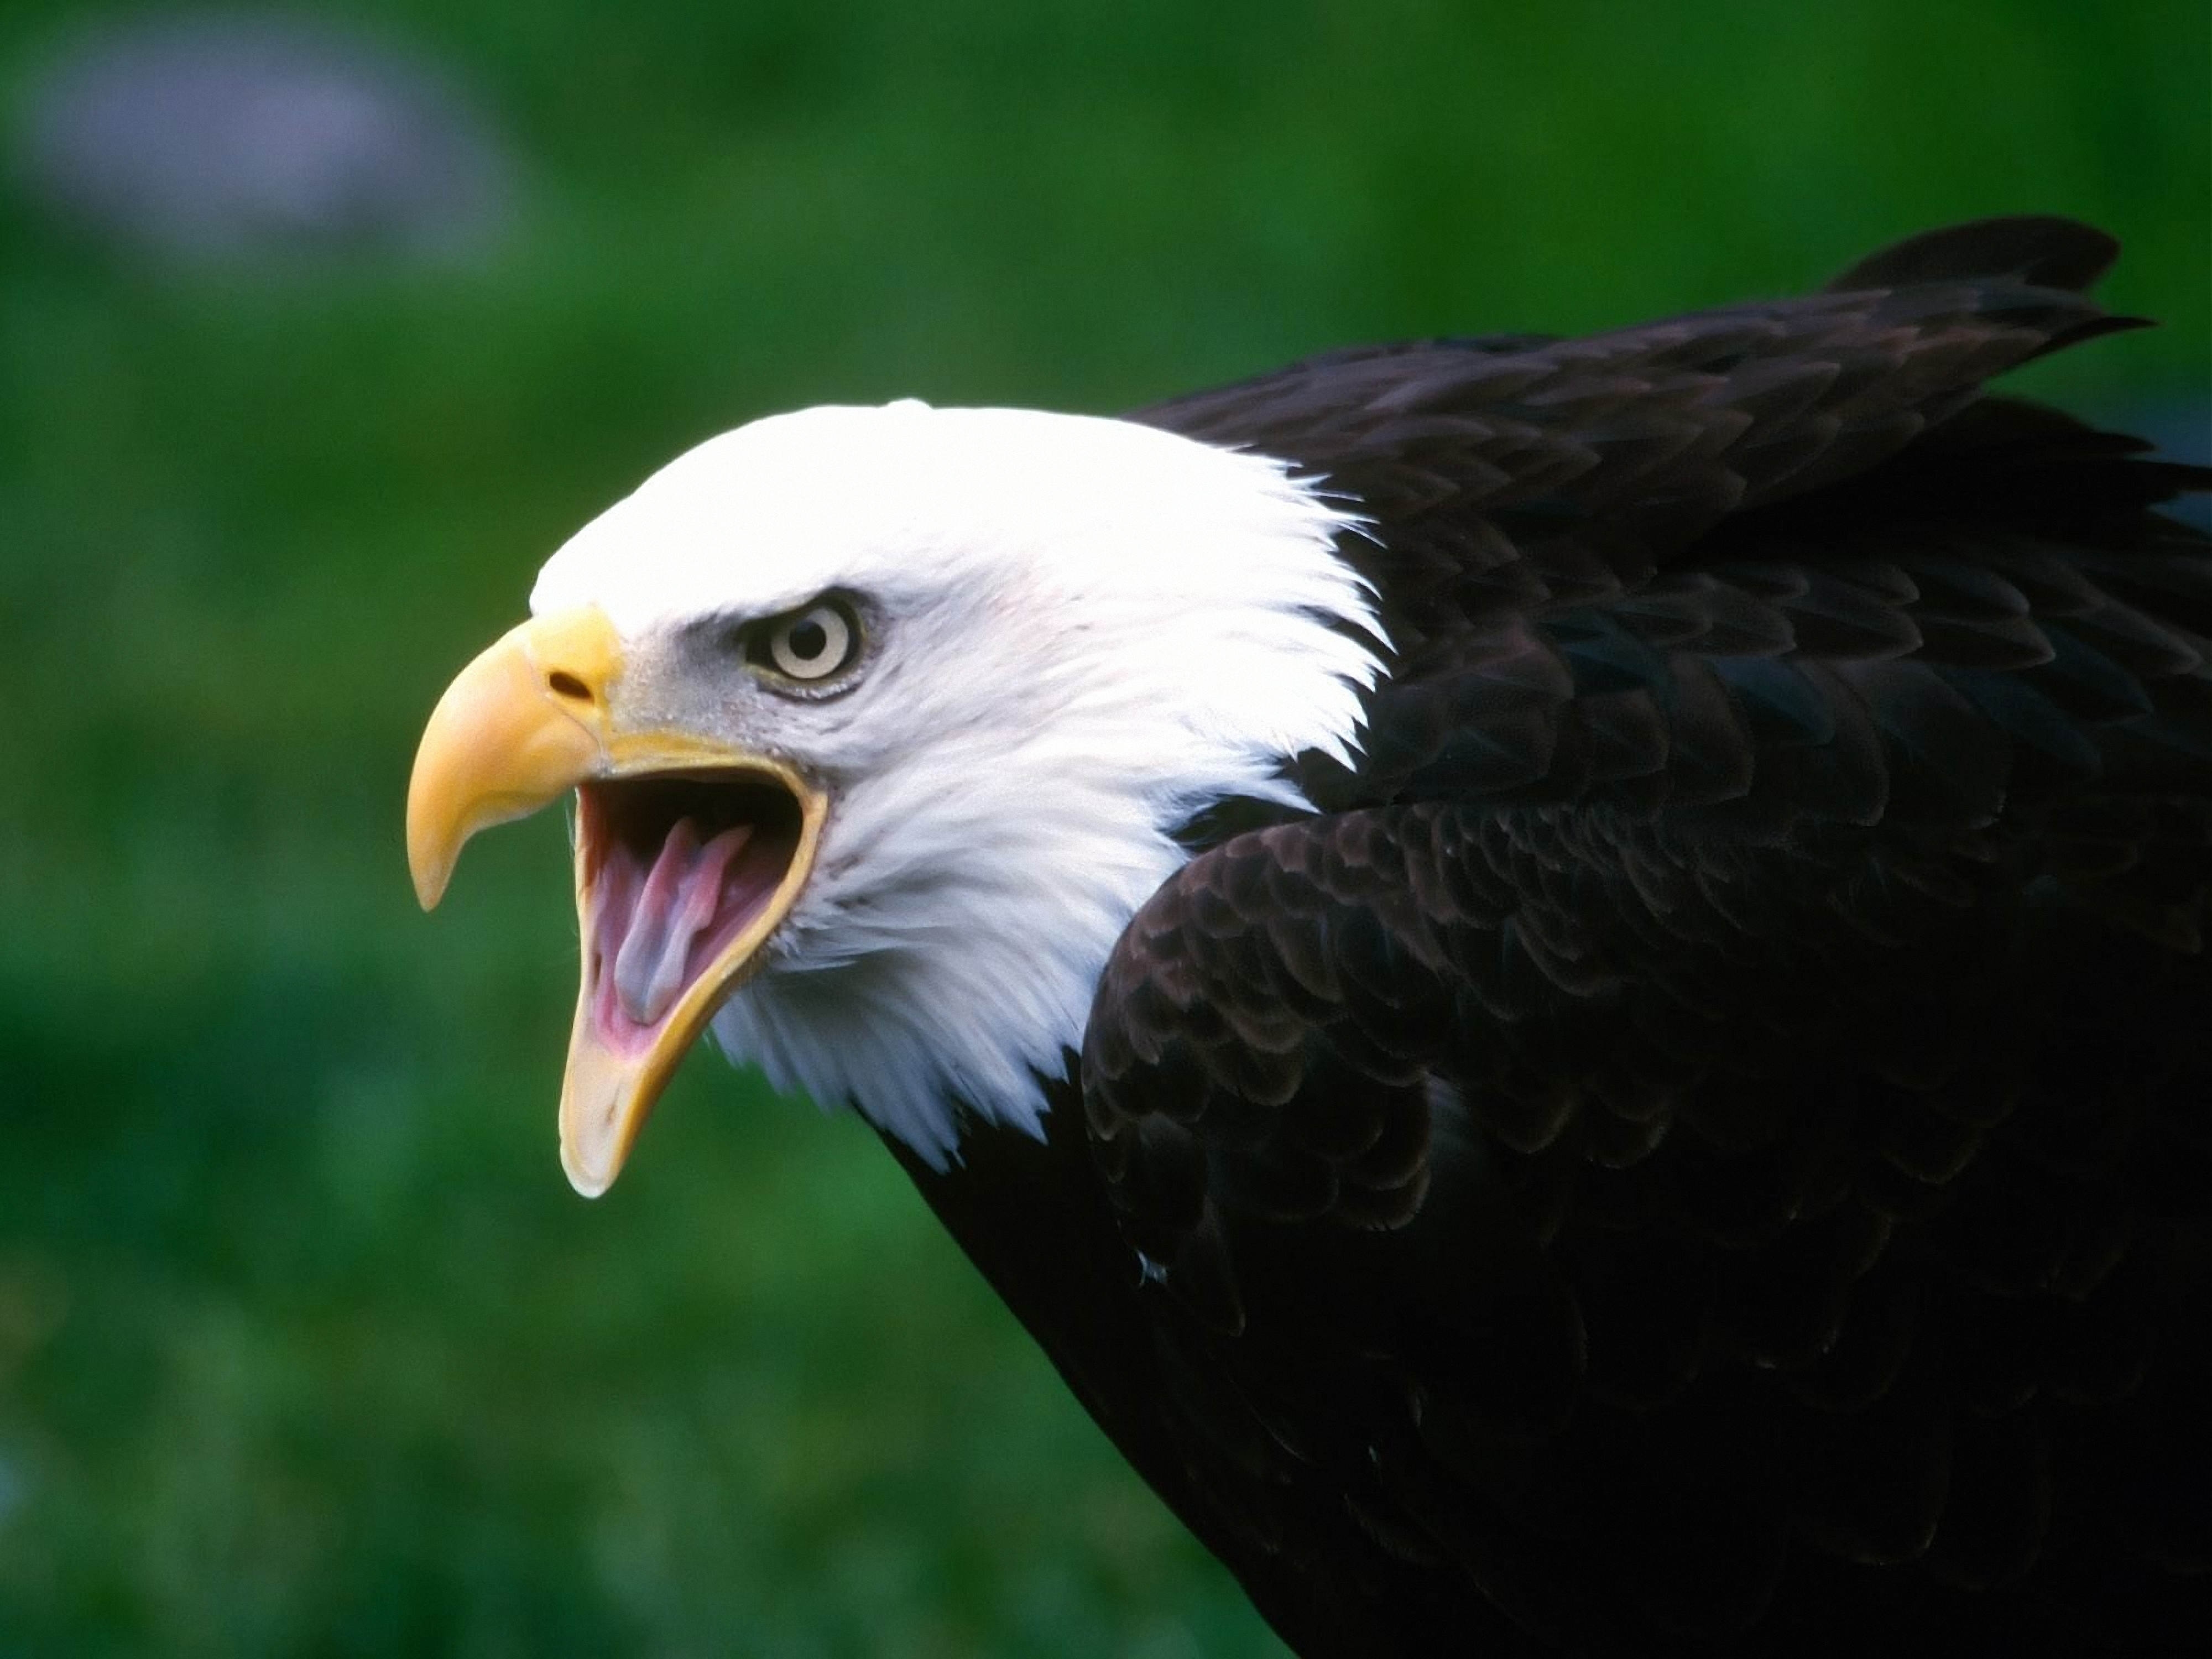 145788 Screensavers and Wallpapers Scream for phone. Download animals, bird, beak, eagle, scream, cry pictures for free